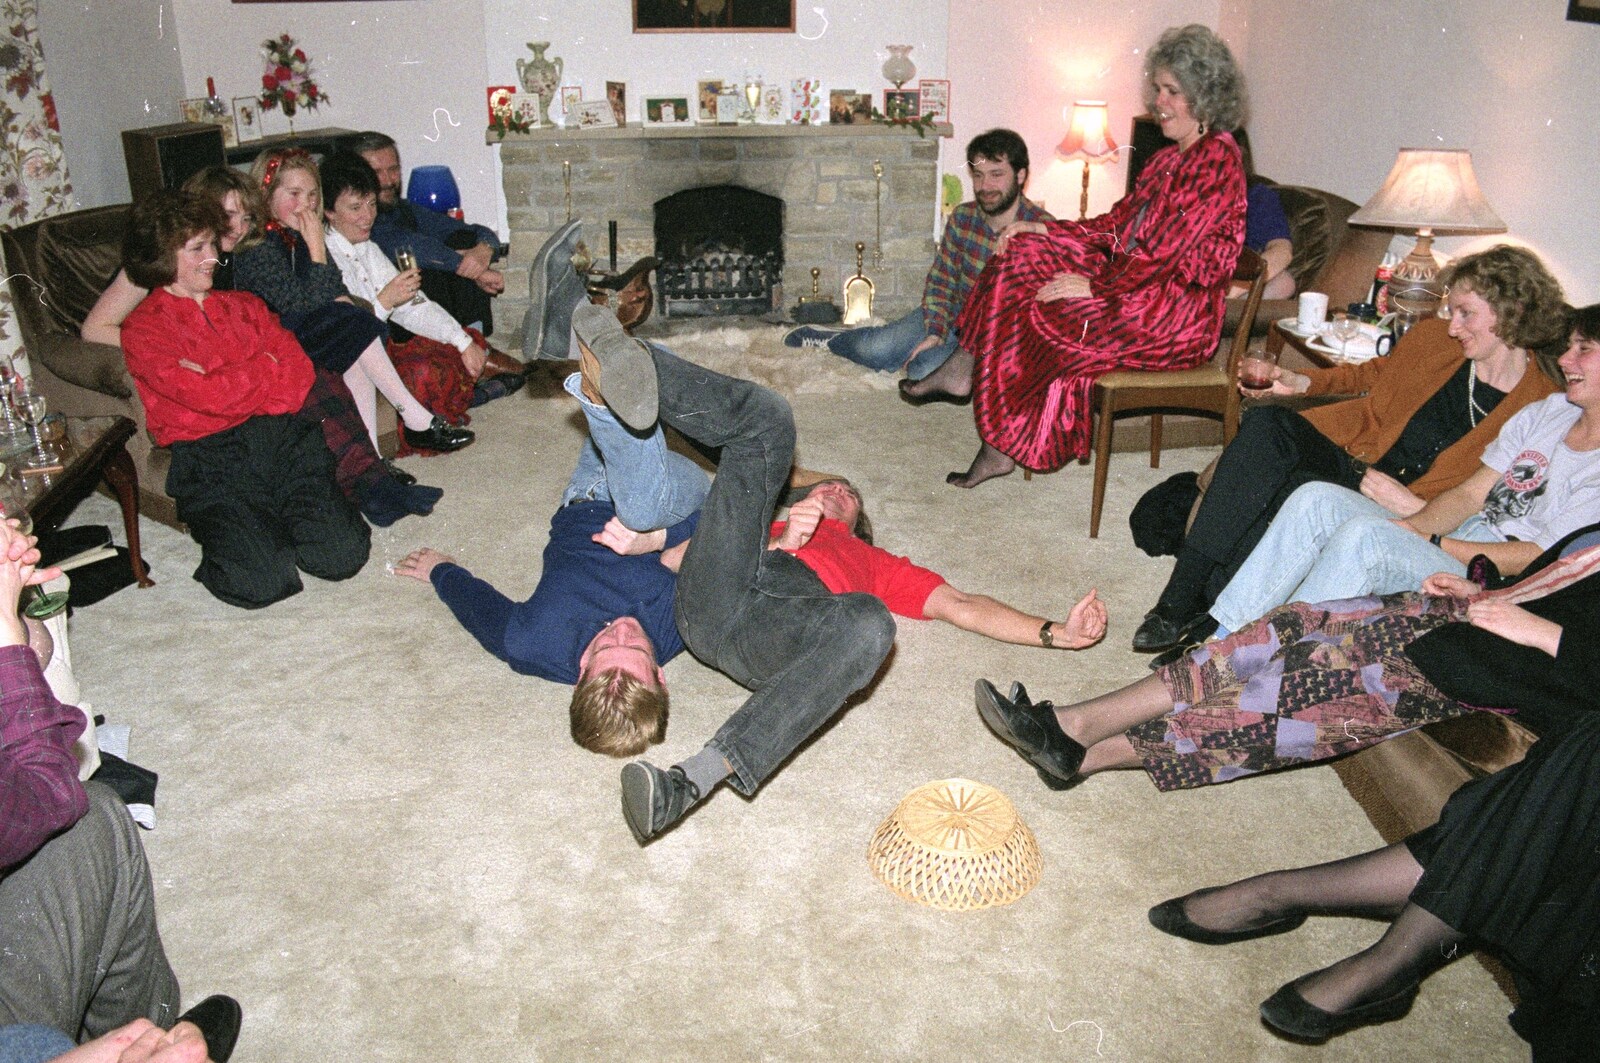 More leg wrestling from New Year's Eve at Phil's, Hordle, Hampshire - 31st December 1990